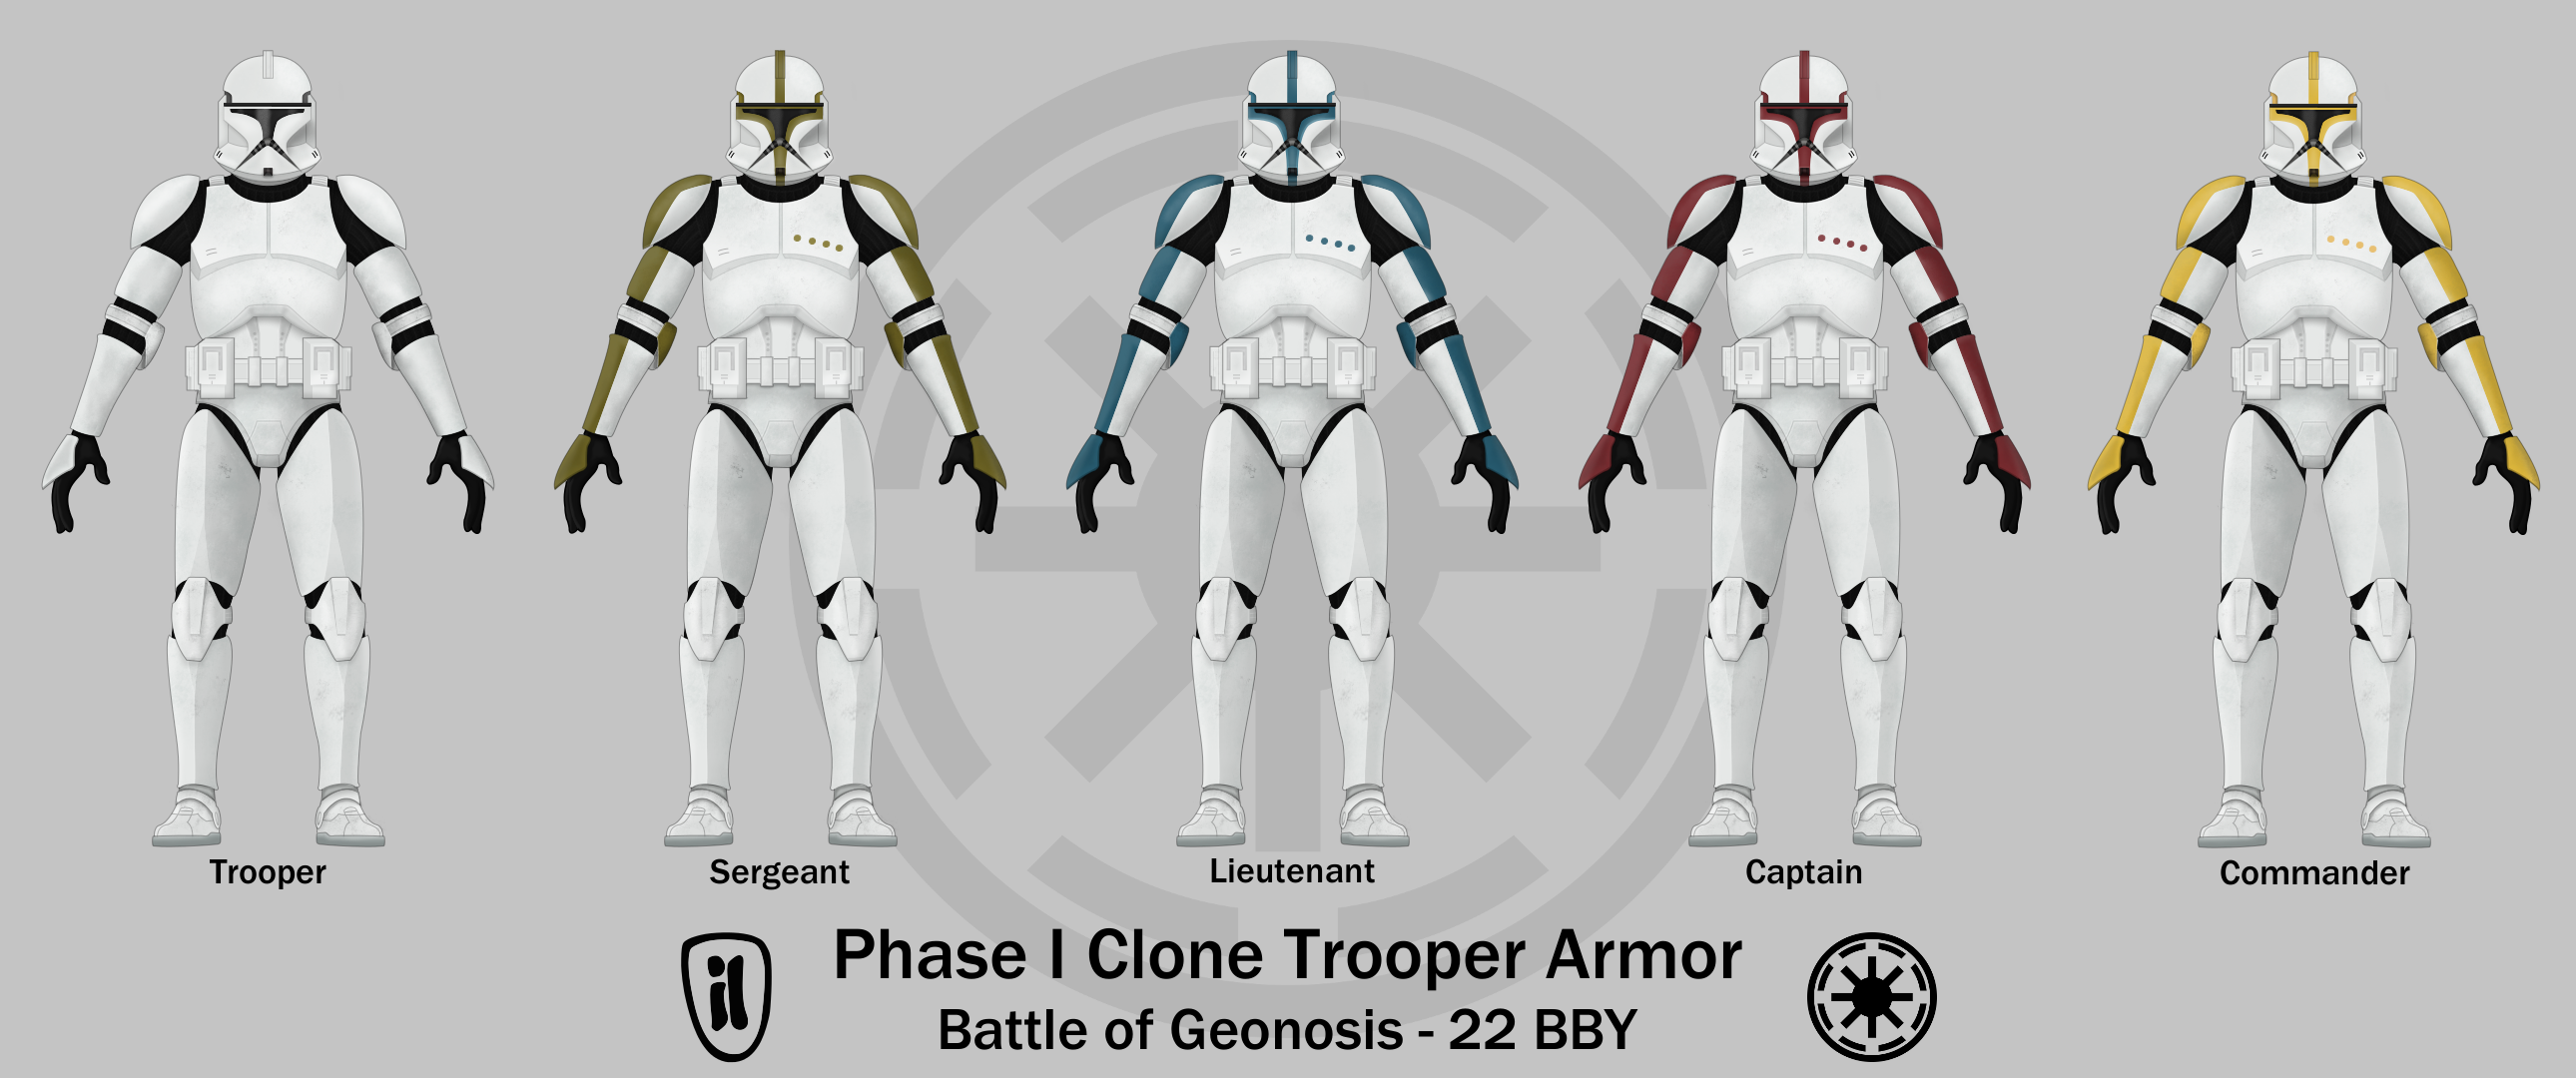 phase_i_clone_trooper_armor_by_thematsuyama-d8wvqot.png